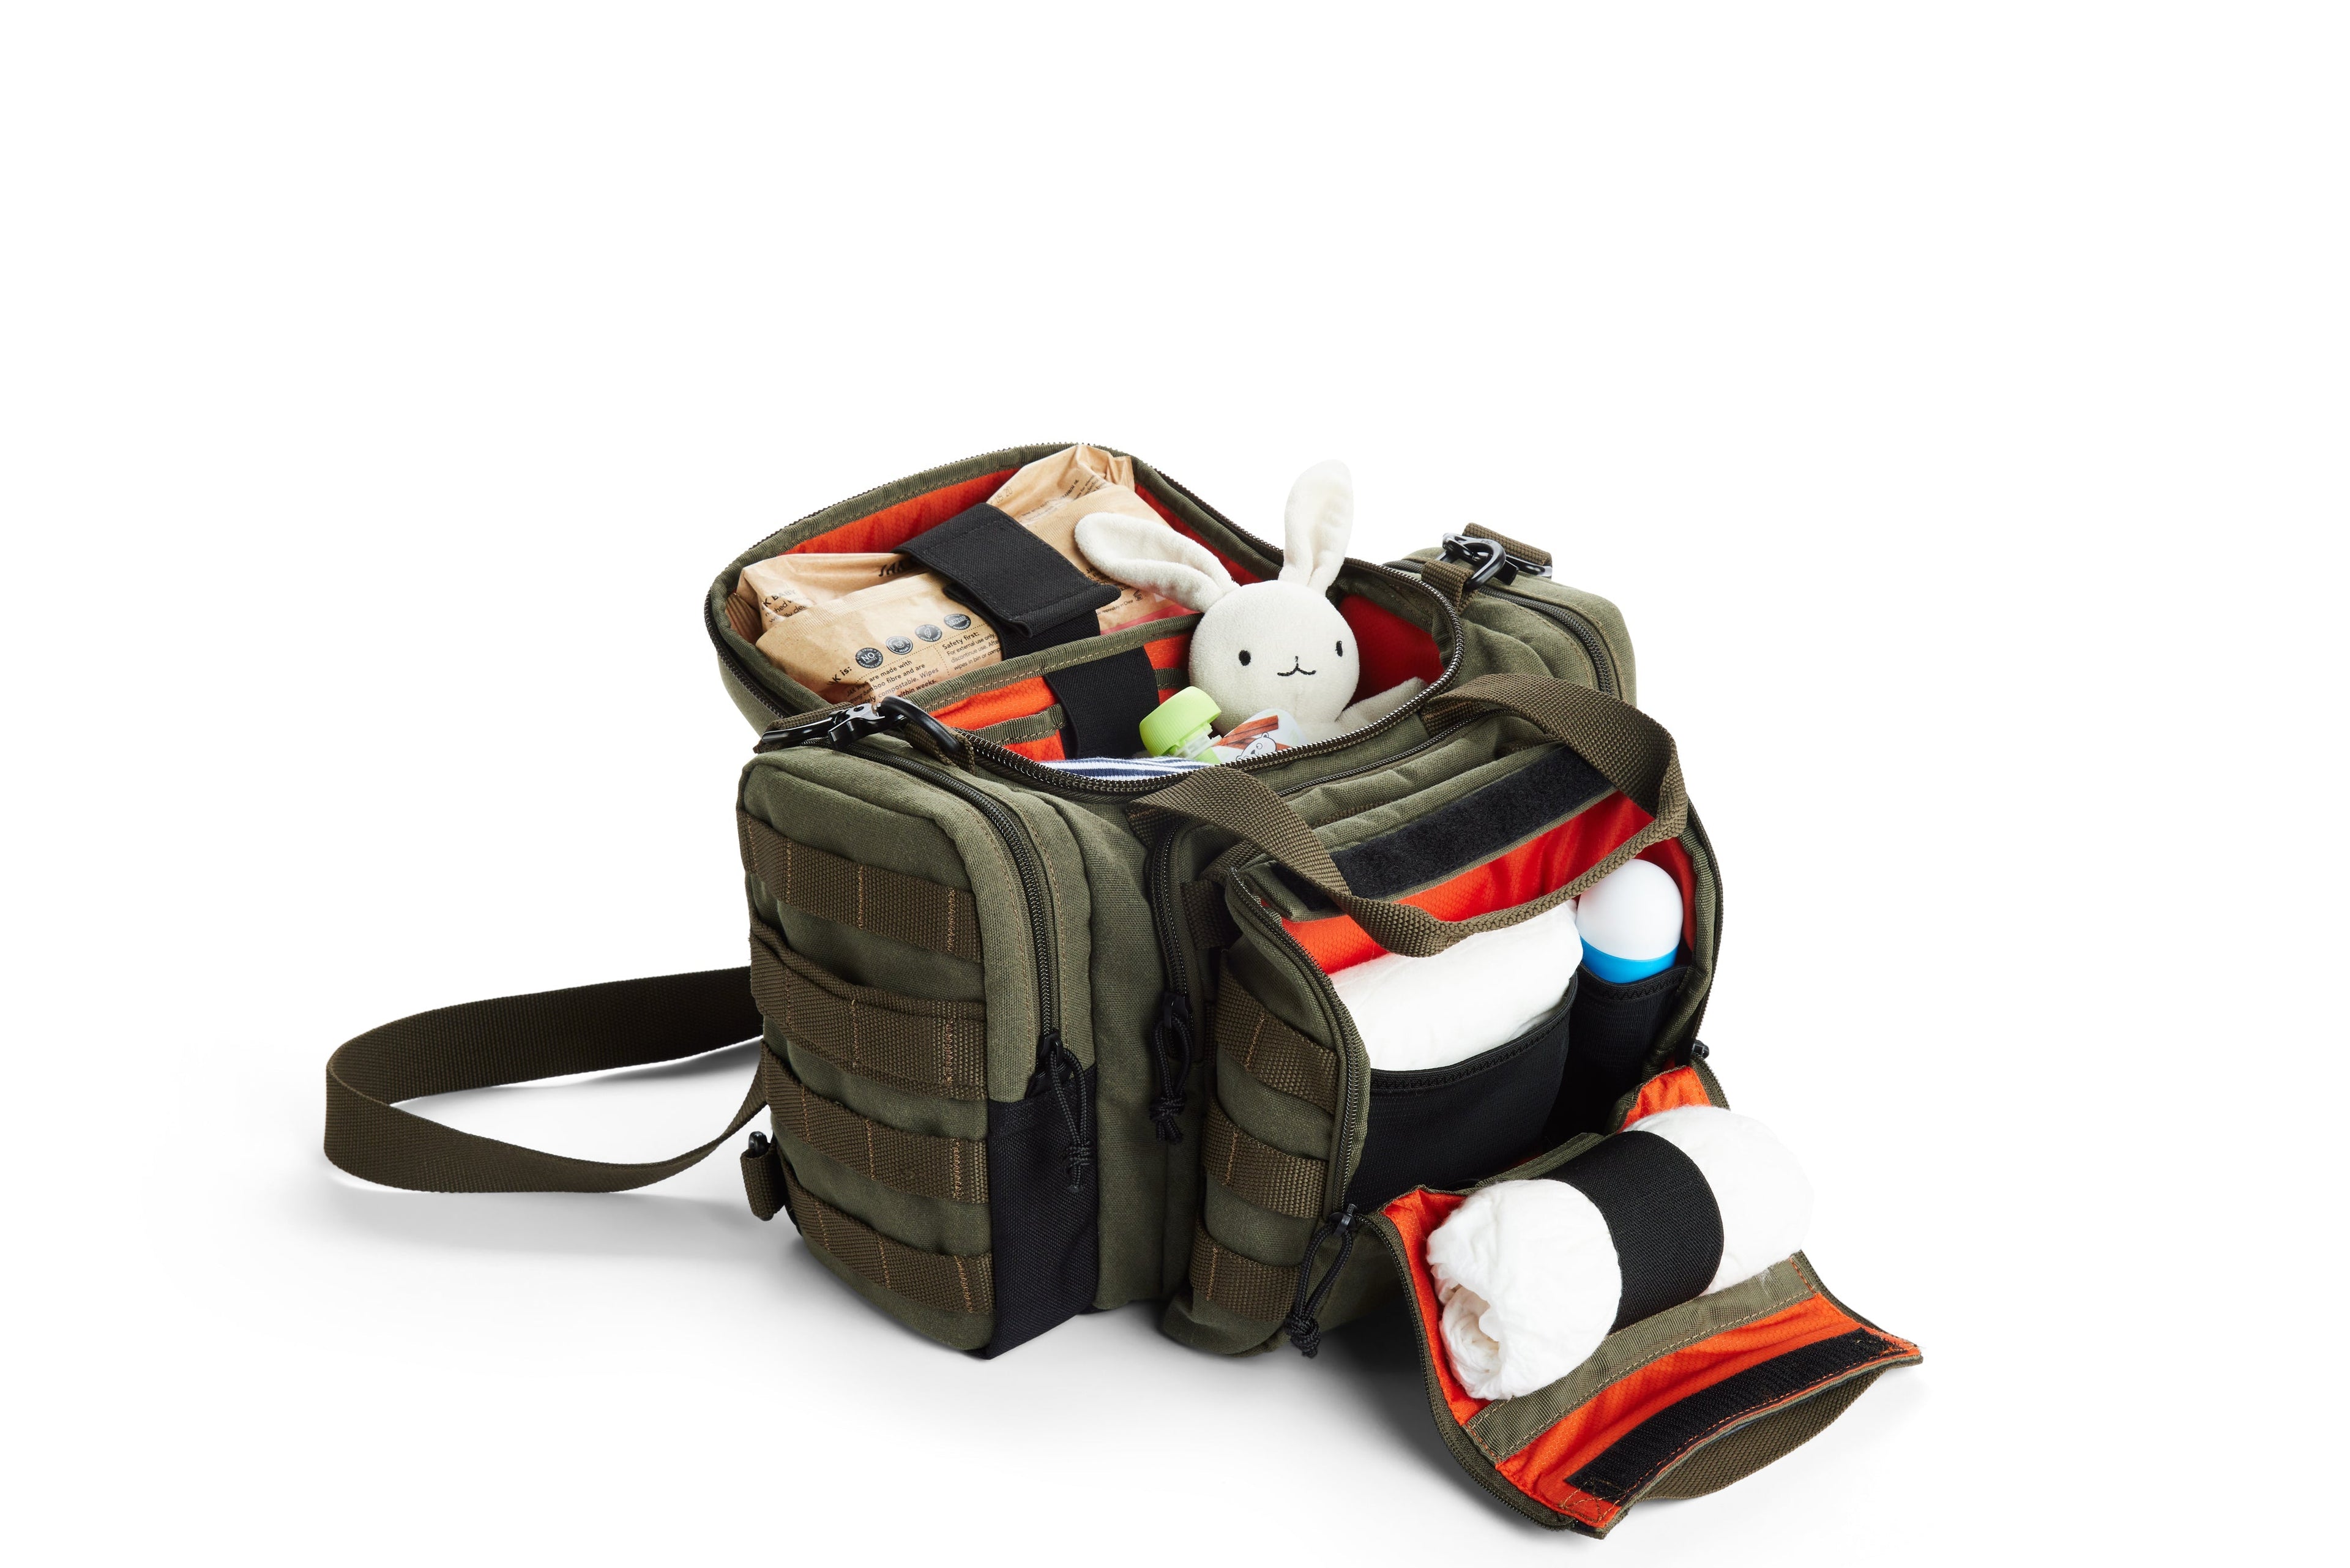 Load video: Get to know the Go Bag nappy bag for dads